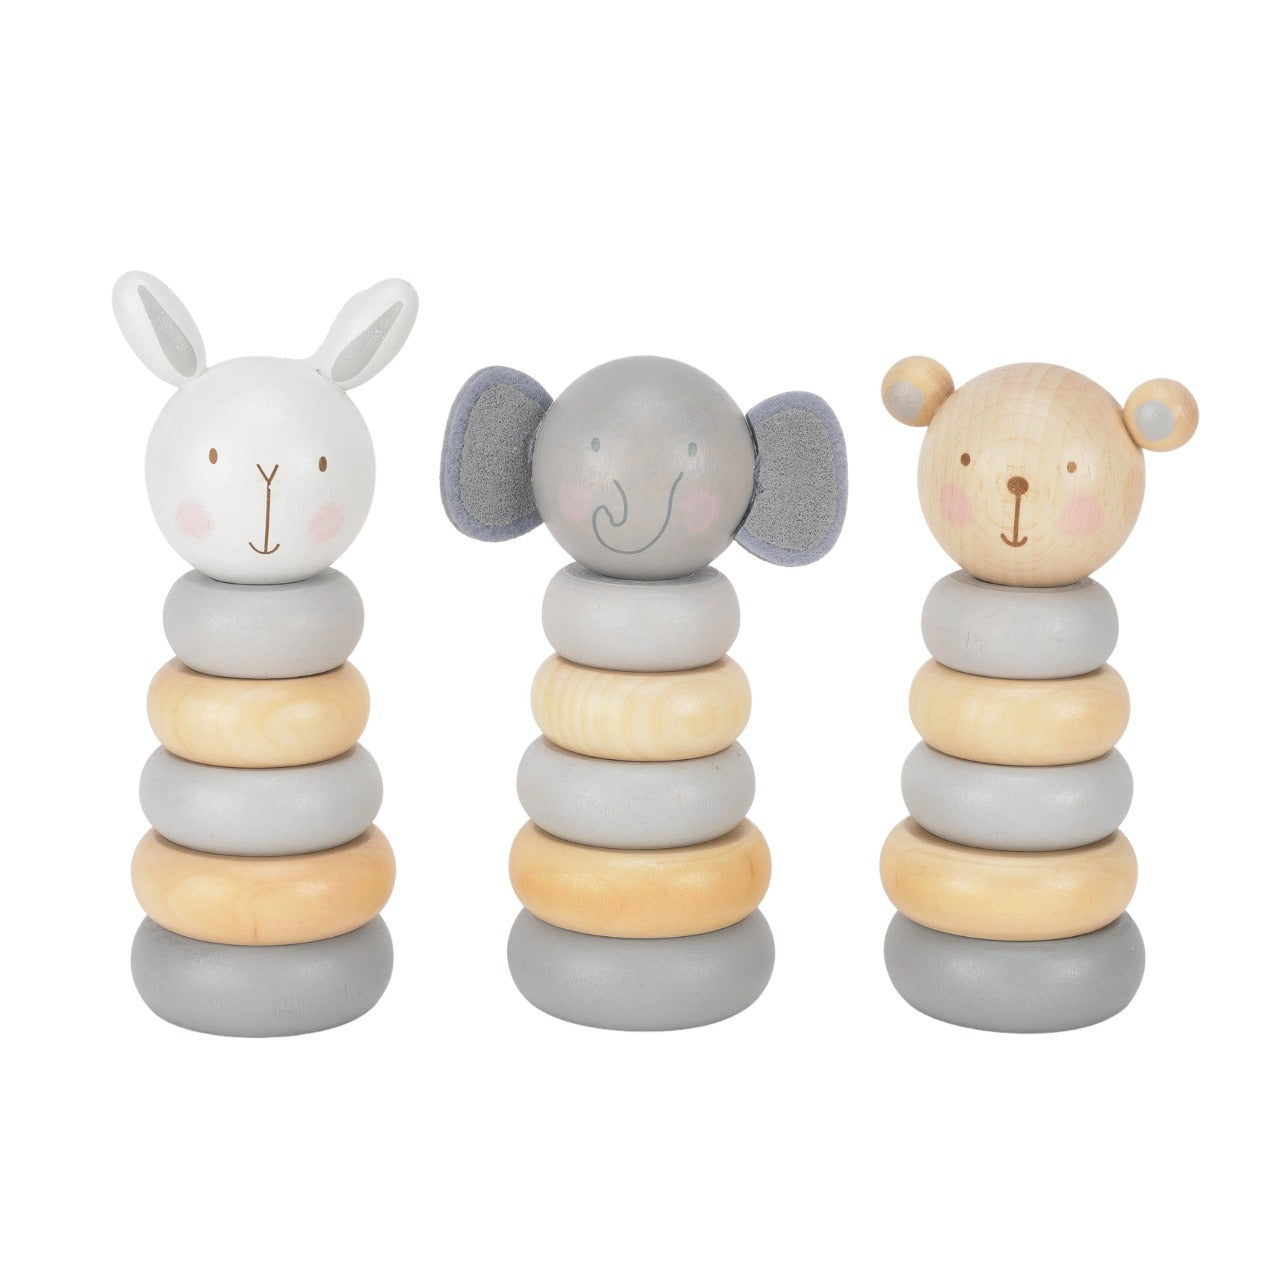 Bambino Wooden Stacking Toy - Elephant  Help your little one develop their problem solving and coordination skills with one of these adorable wooden character stacking ring toys. From BAMBINO BY JULIANA® - opening new eyes to a world of wonder.